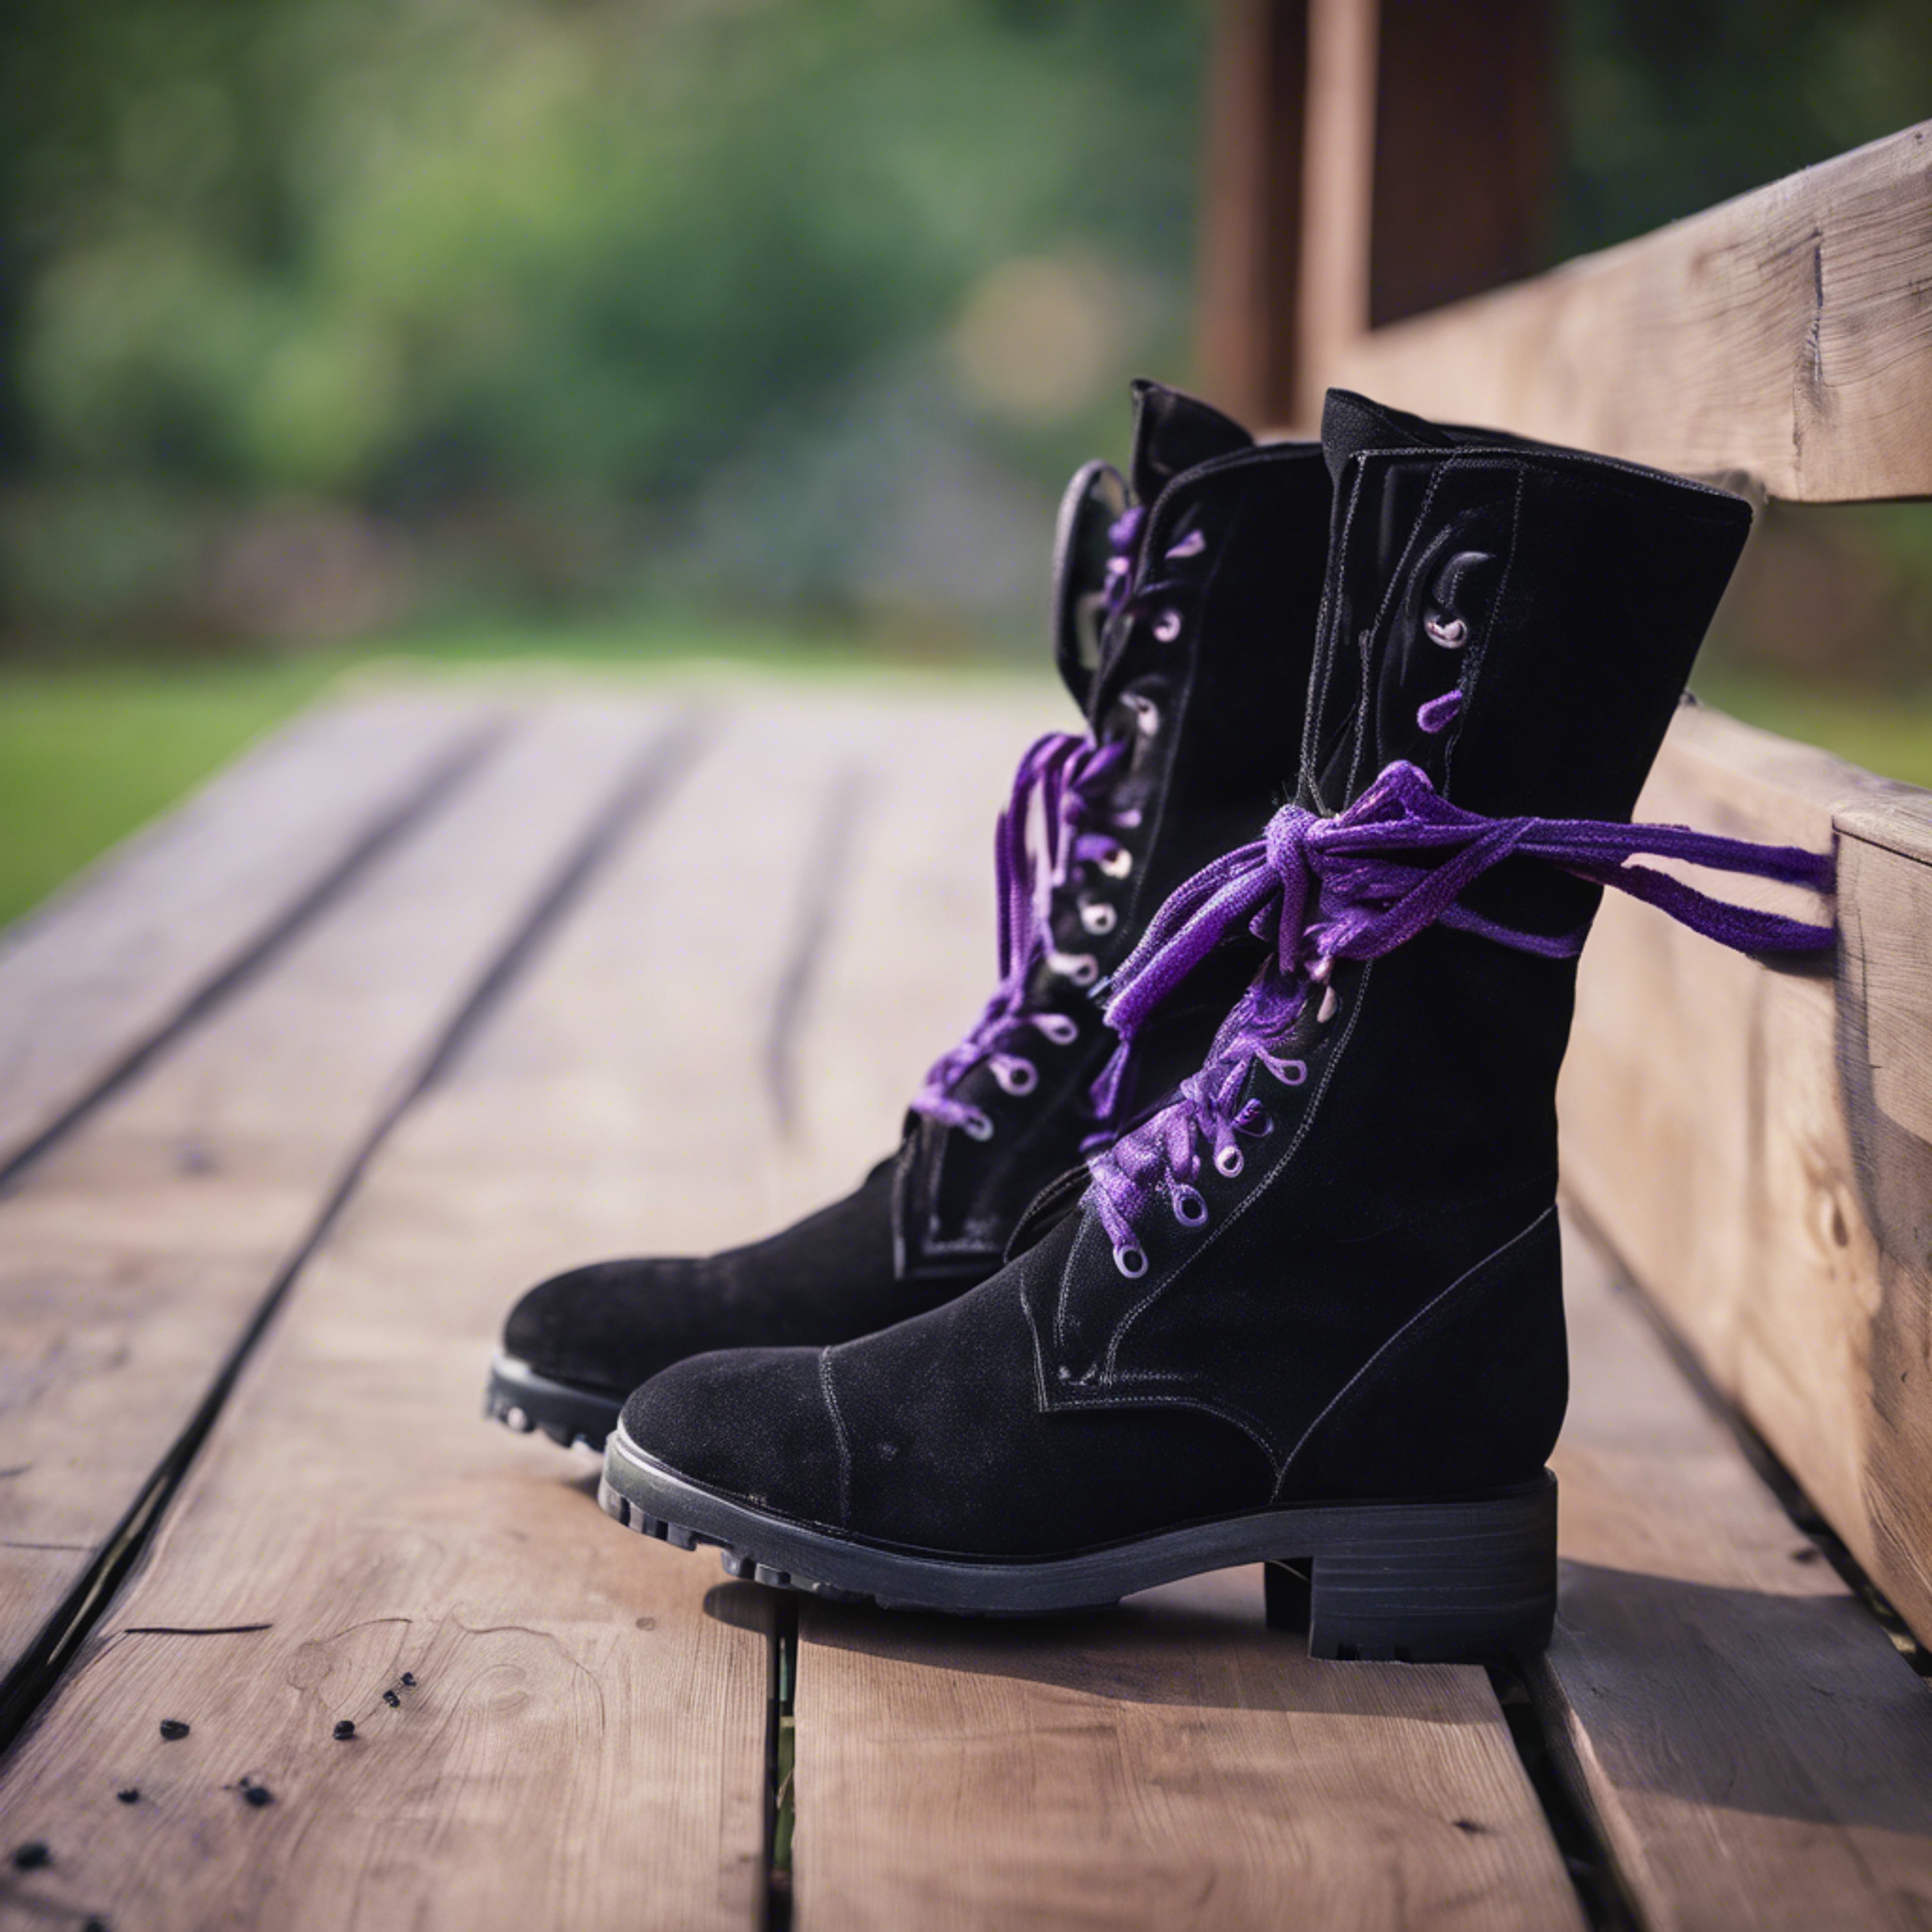 A pair of black suede boots with purple laces left casually on a wooden porch. Tapeet[fedd81ee4b6b40088ba0]